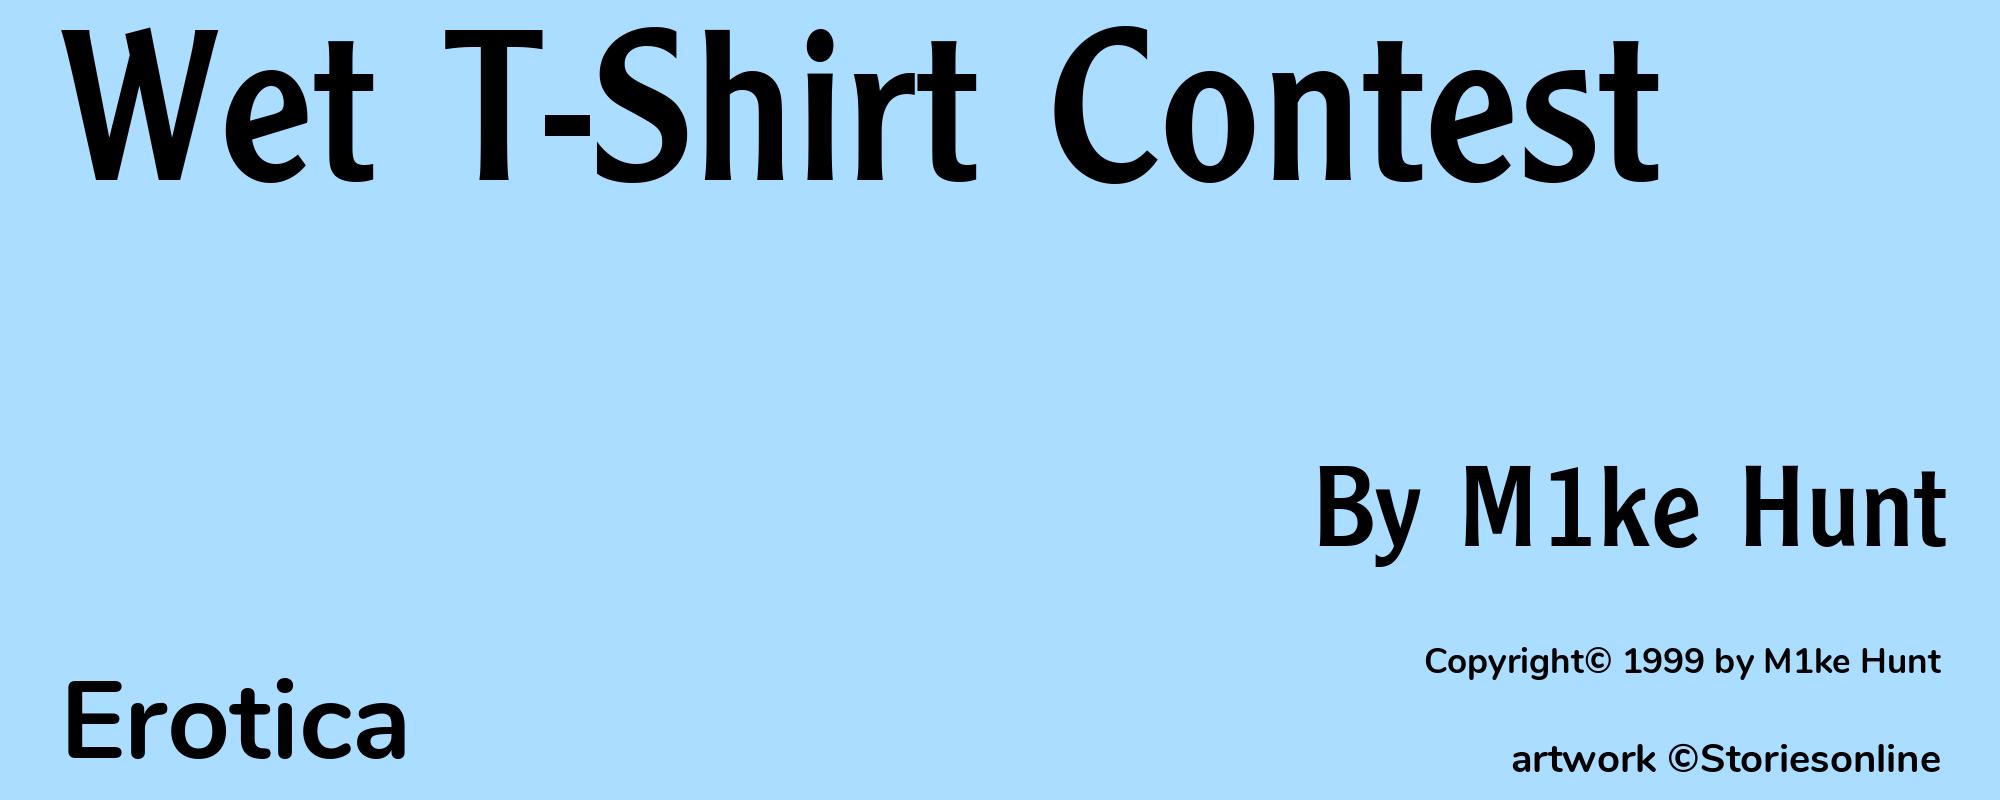 Wet T-Shirt Contest - Cover